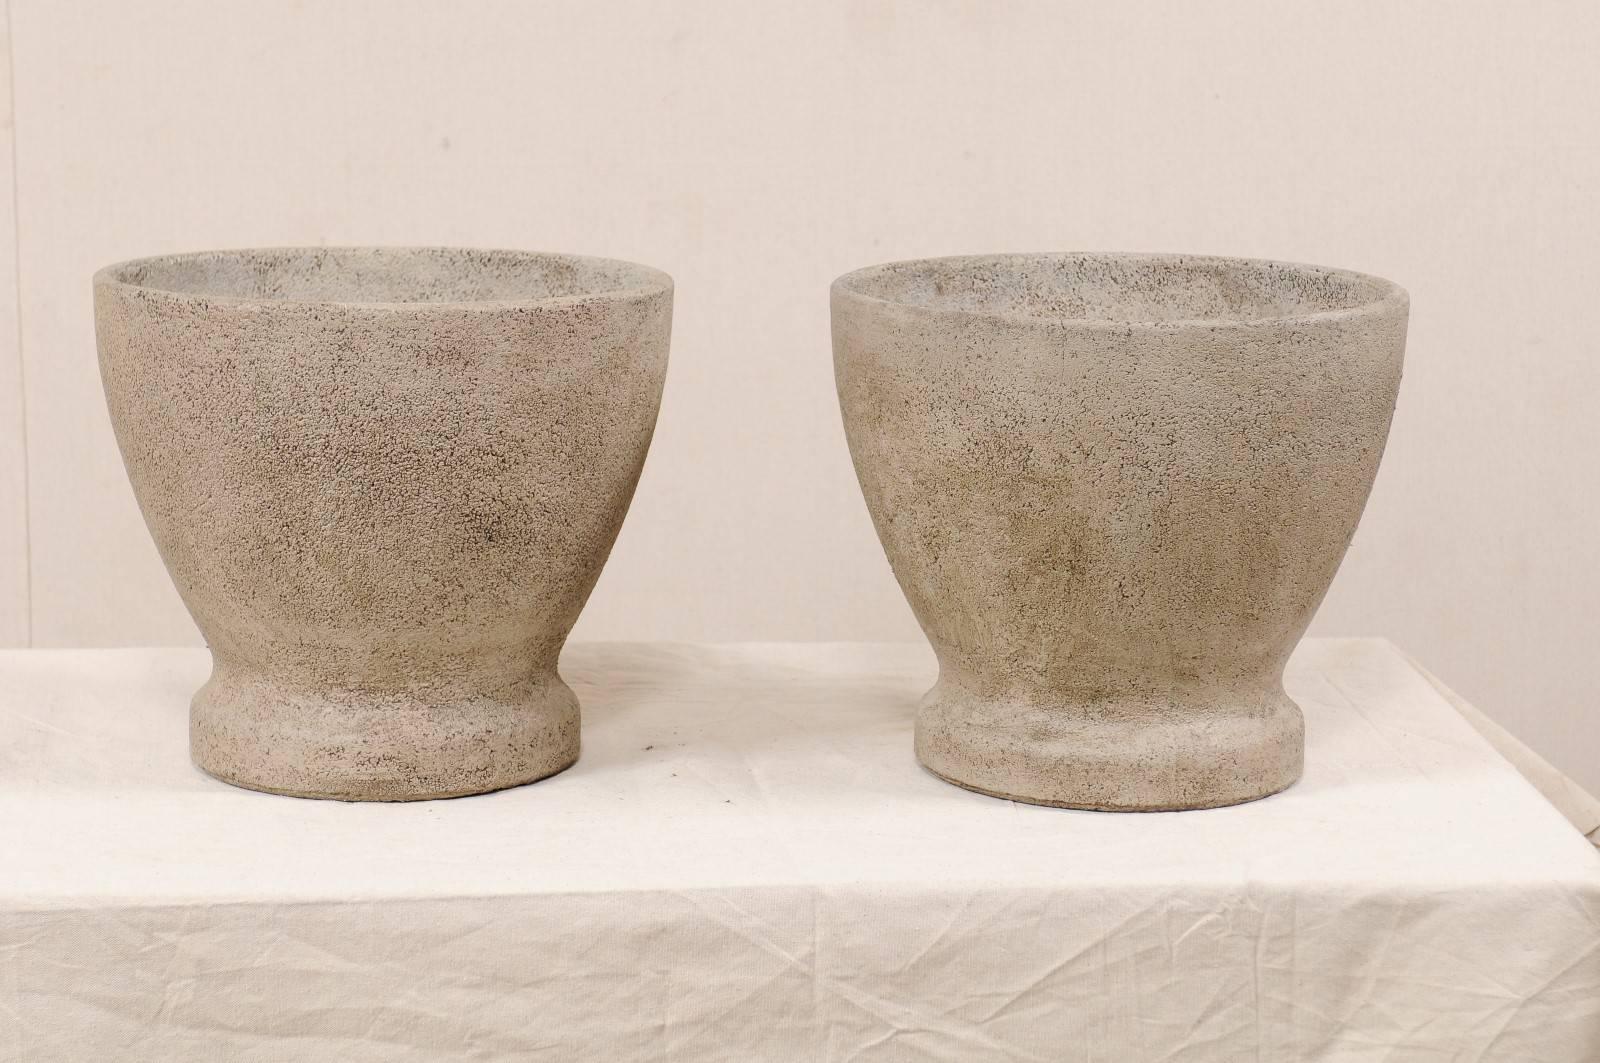 A pair of French cast stone planters from the mid-20th century. This pair of vintage French planters have been made of cast stone and have a simple, clean design element to them. These round-shaped planters are wider at their tops lips and gently